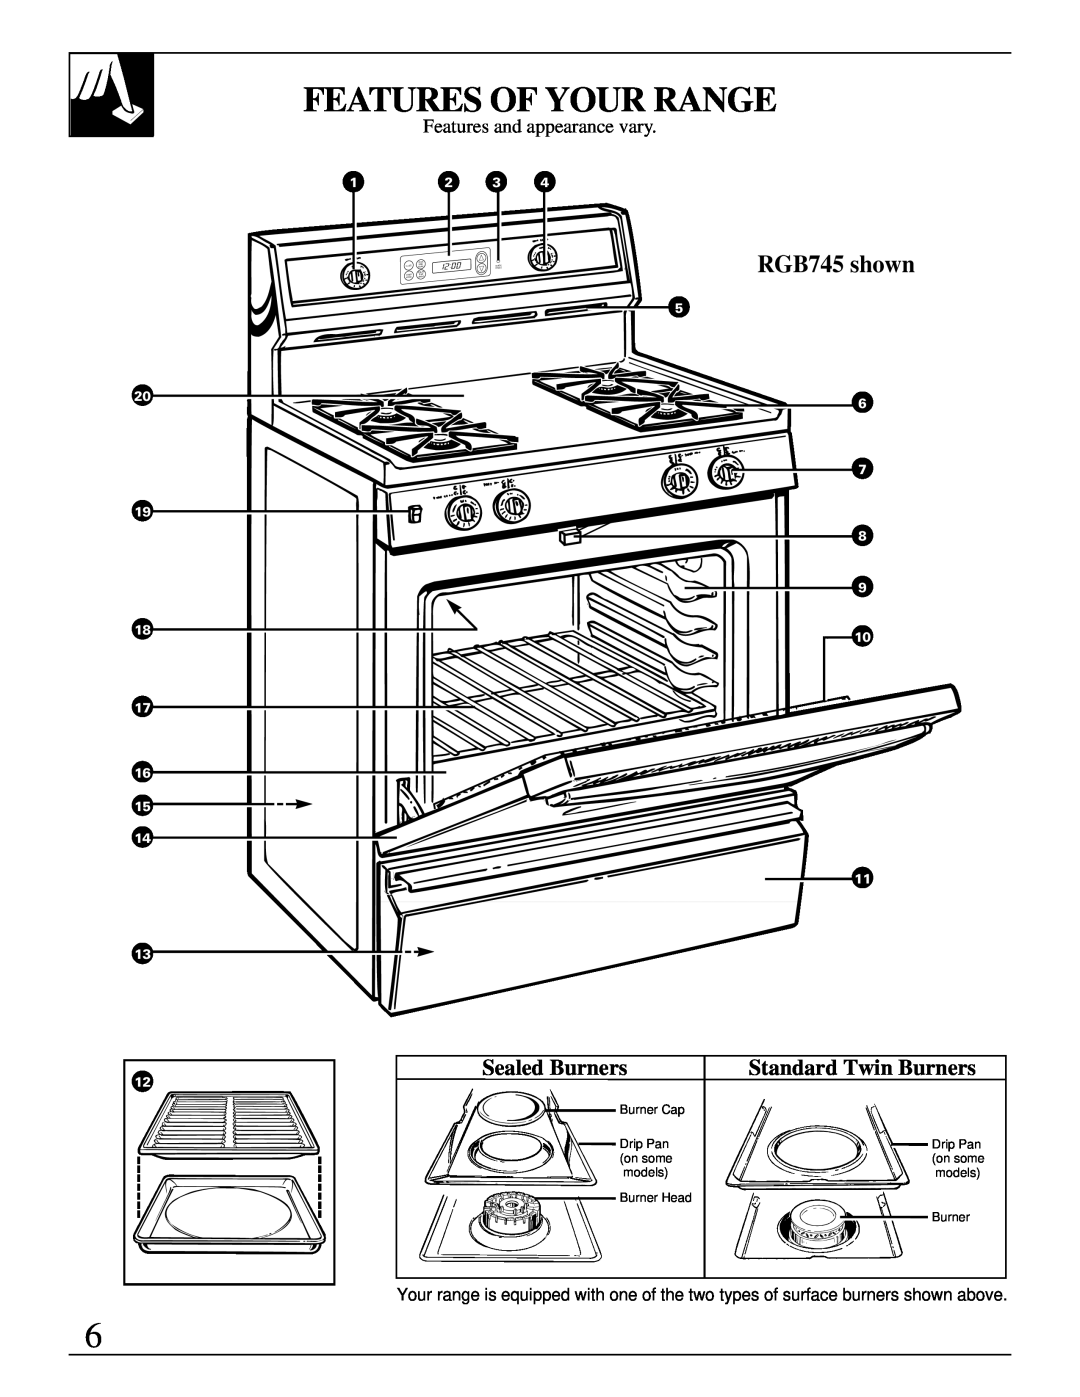 Hotpoint RGB744 installation instructions Features Of Your Range, RGB745 shown, 19 8 9, 16 15 14 11 13 